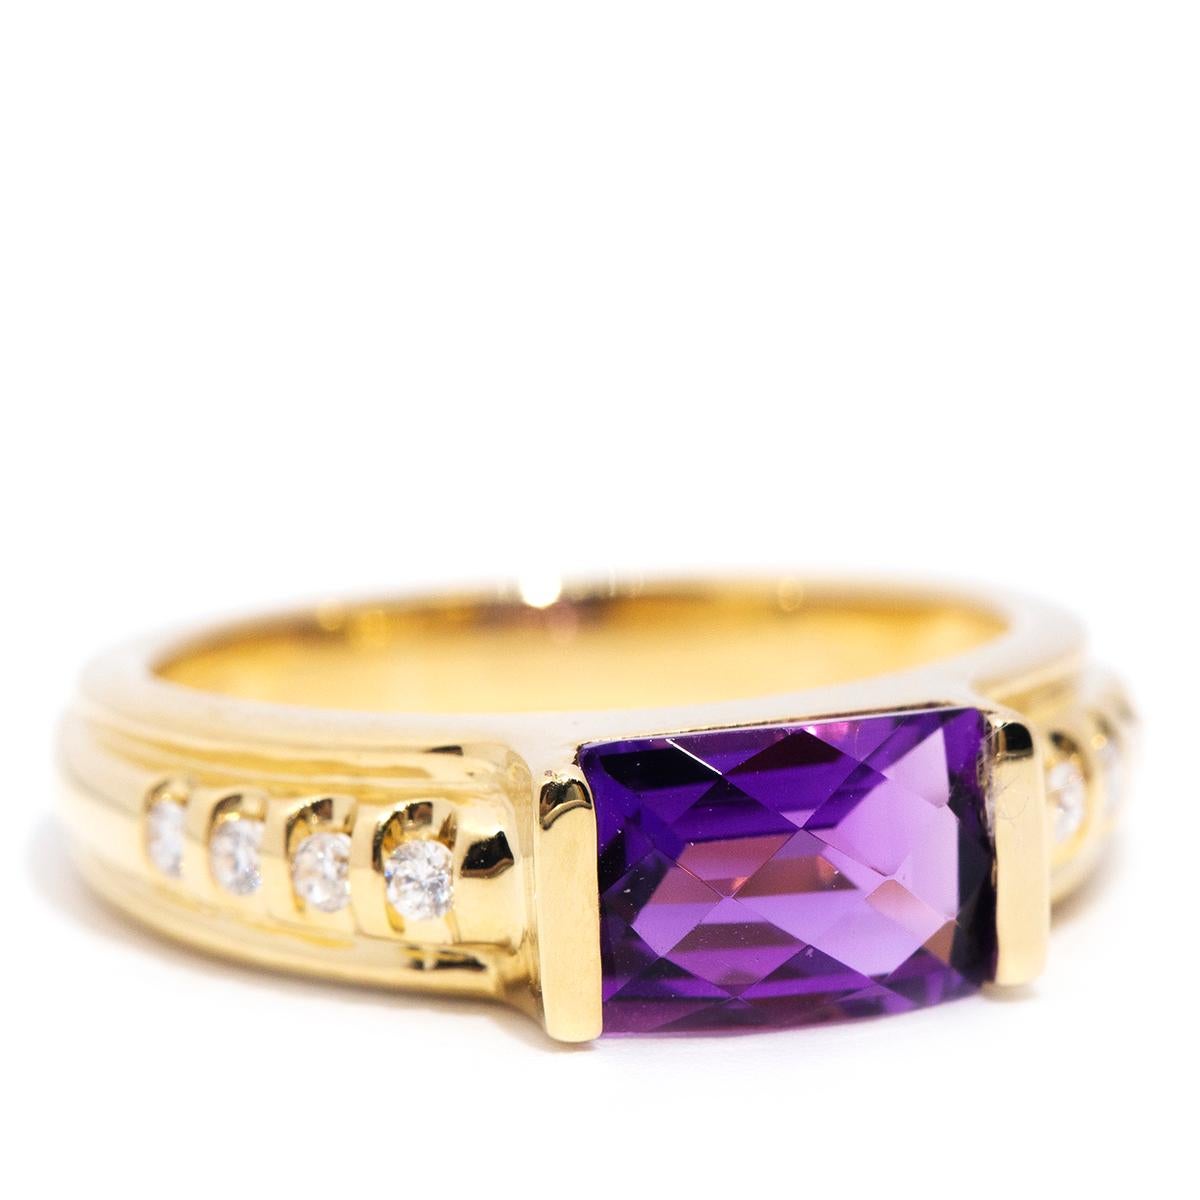 Lovingly forged in 18 carat yellow gold, this gorgeous vintage ring features four sparkling round brilliant diamonds in the band and holds an enchanting checkerboard cut deep purple amethyst. This captivating adornment is named The Lavender Ring.